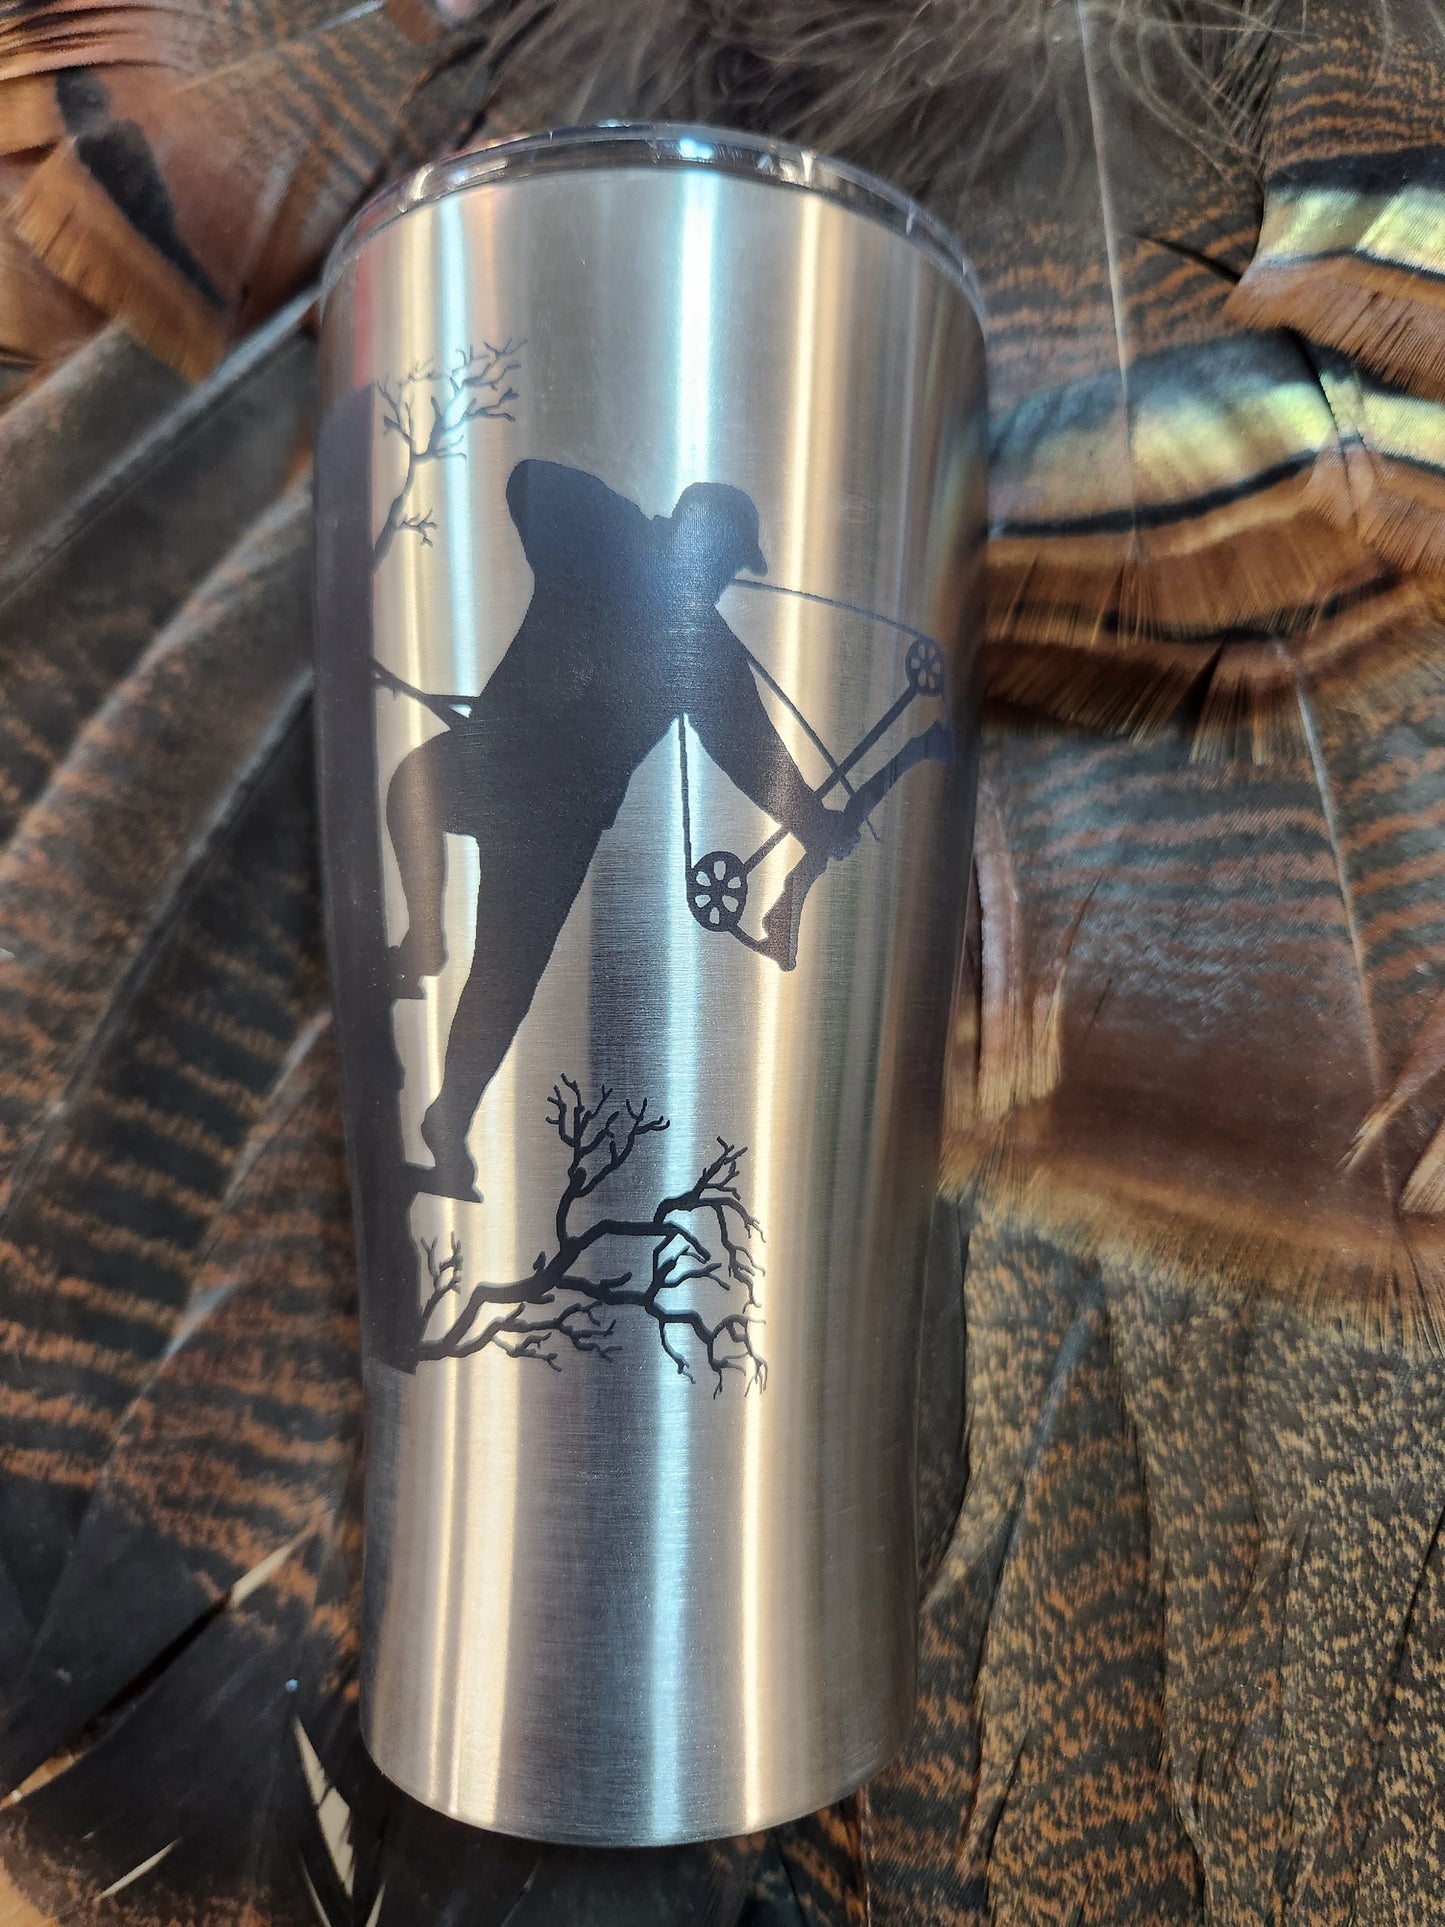 Outdoor drive 20oz tumbler back in the saddle. Limited edition